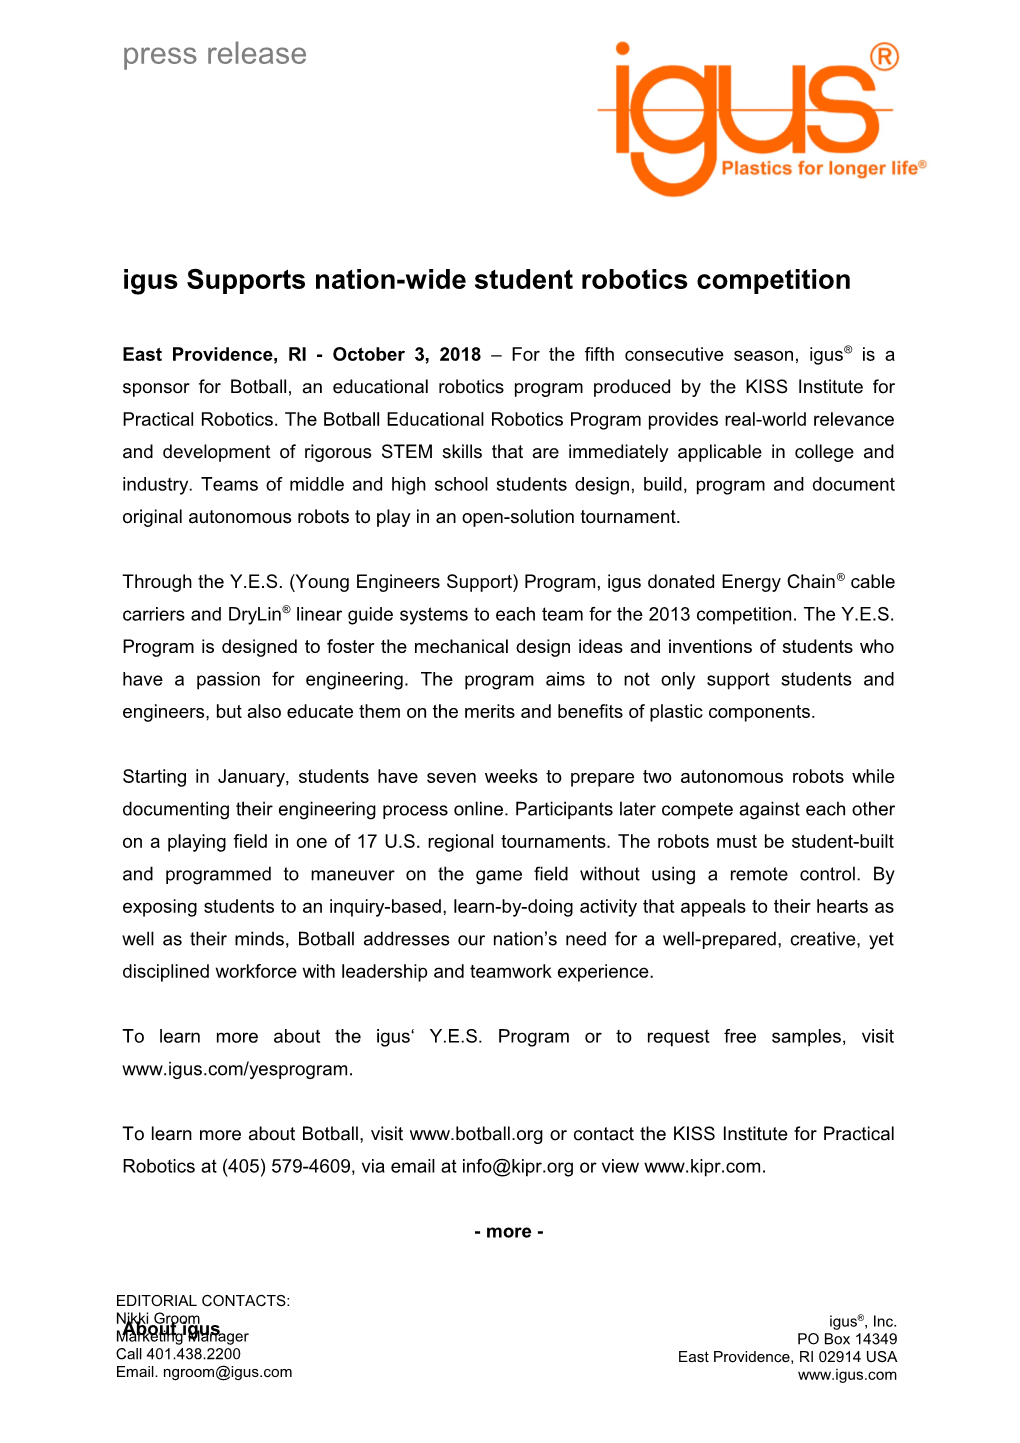 Igus Supports Nation-Wide Student Robotics Competition